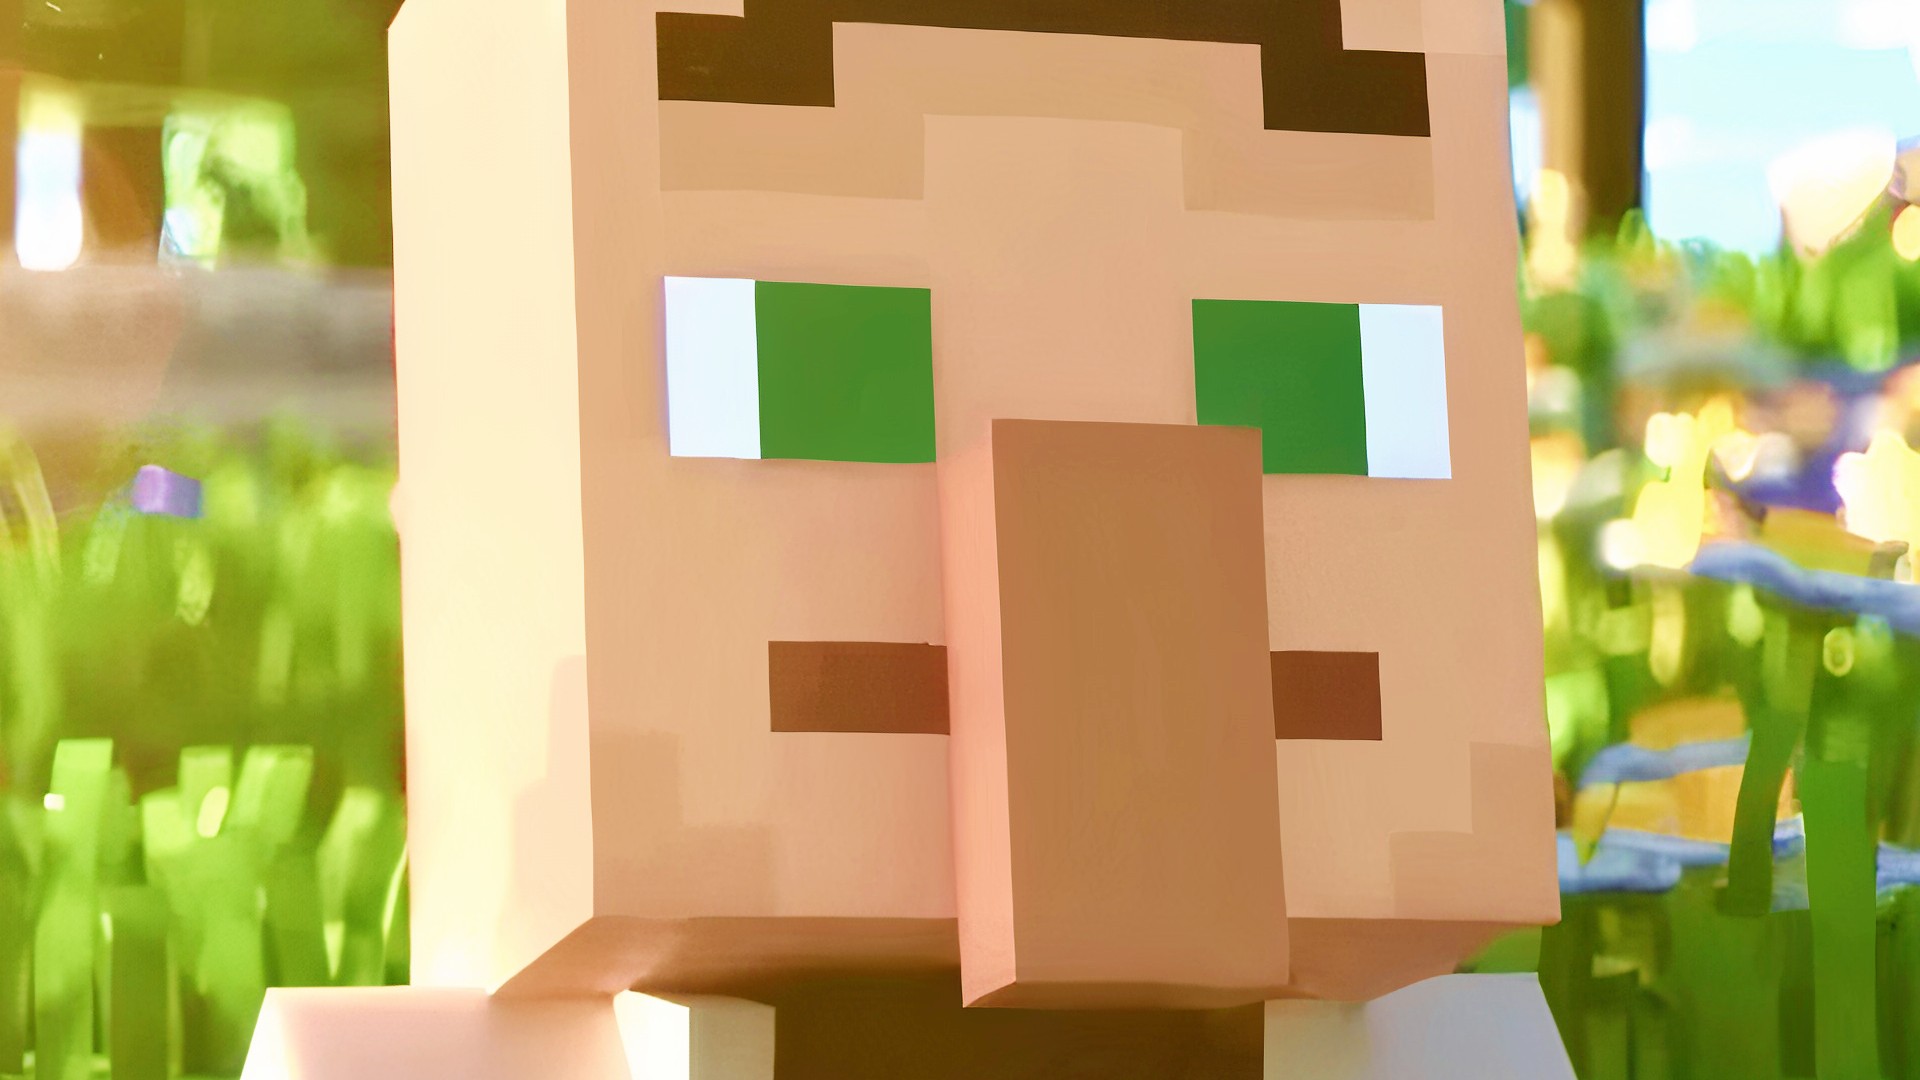 You might lose your Minecraft account unless you act now